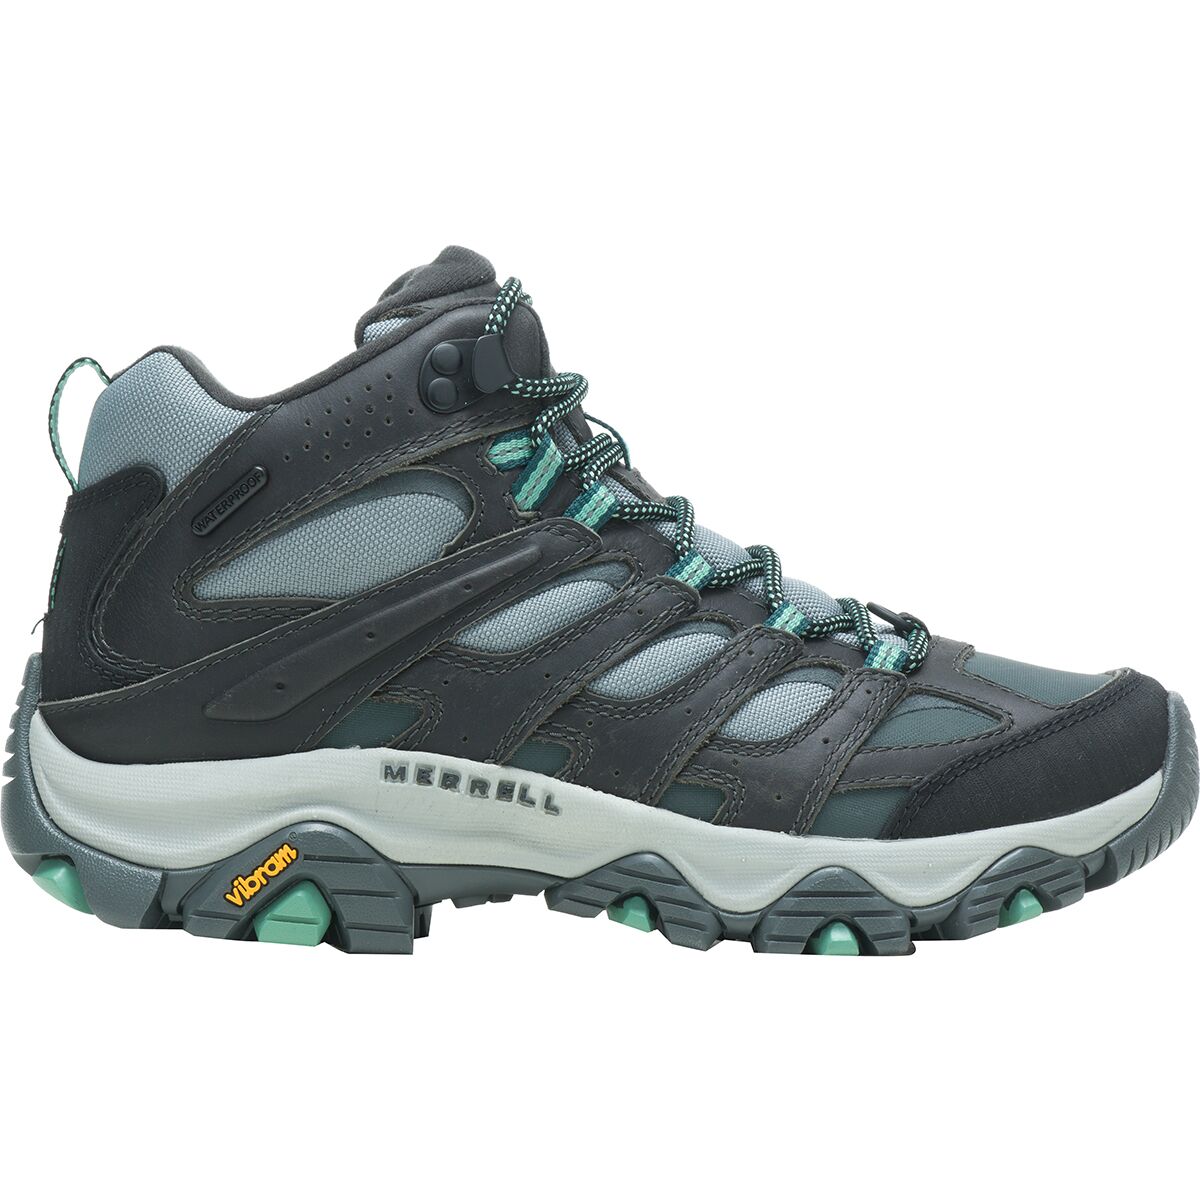 Moab 3 Thermo Mid WP Boot - Women